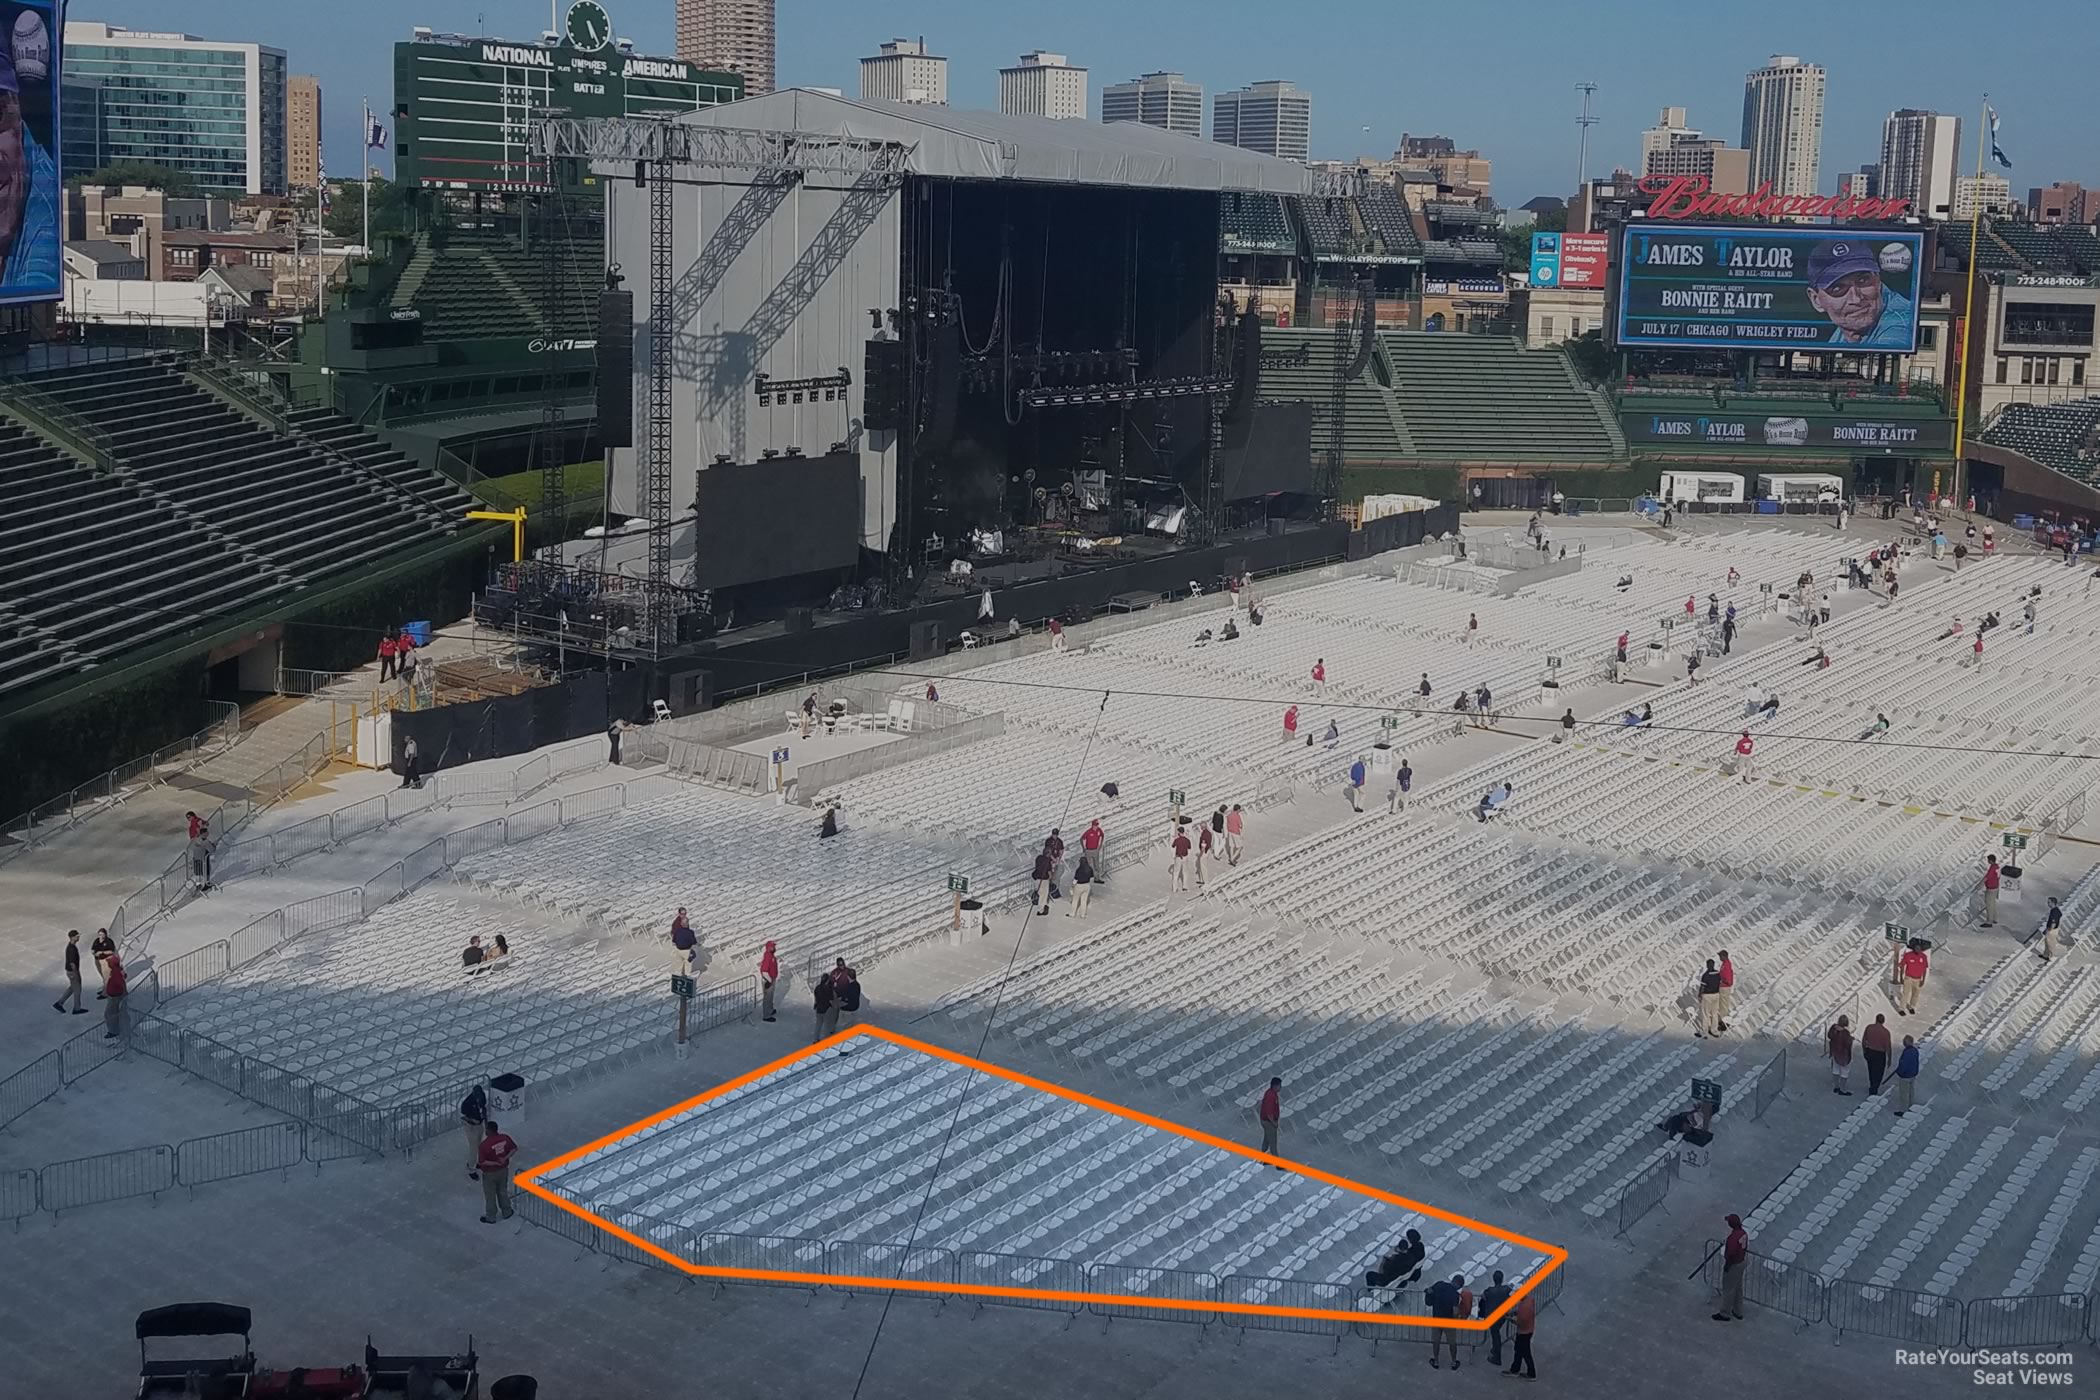 Wrigley Field Seats For Concerts Rateyourseats Com